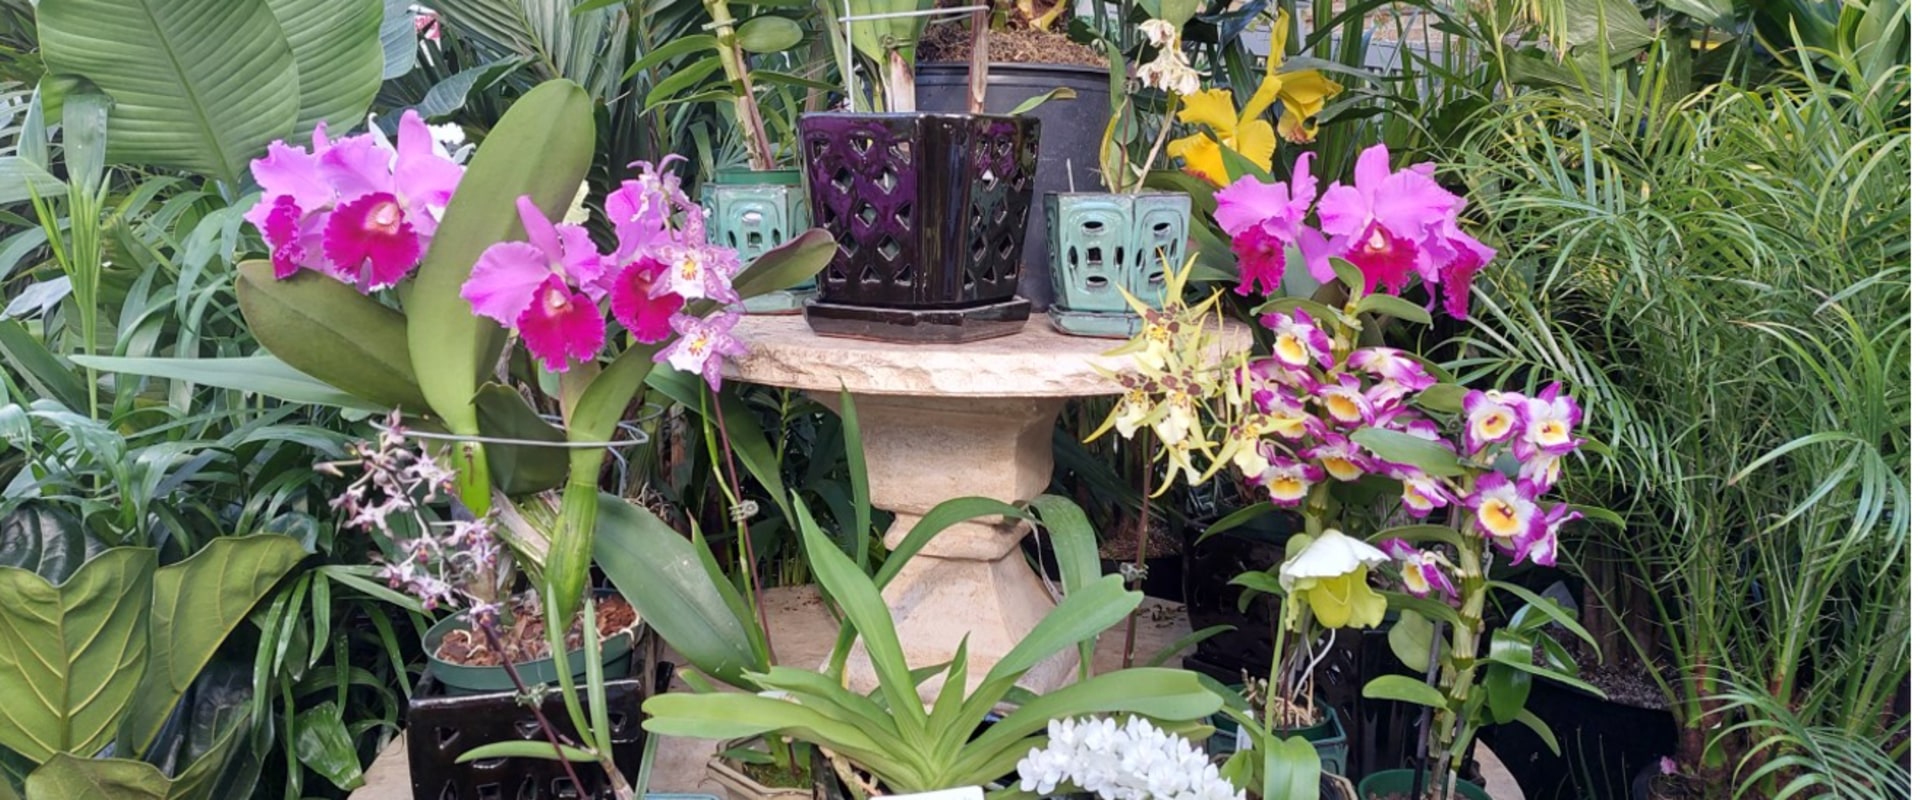 Common Pests and Diseases Found in Orchid Gardening